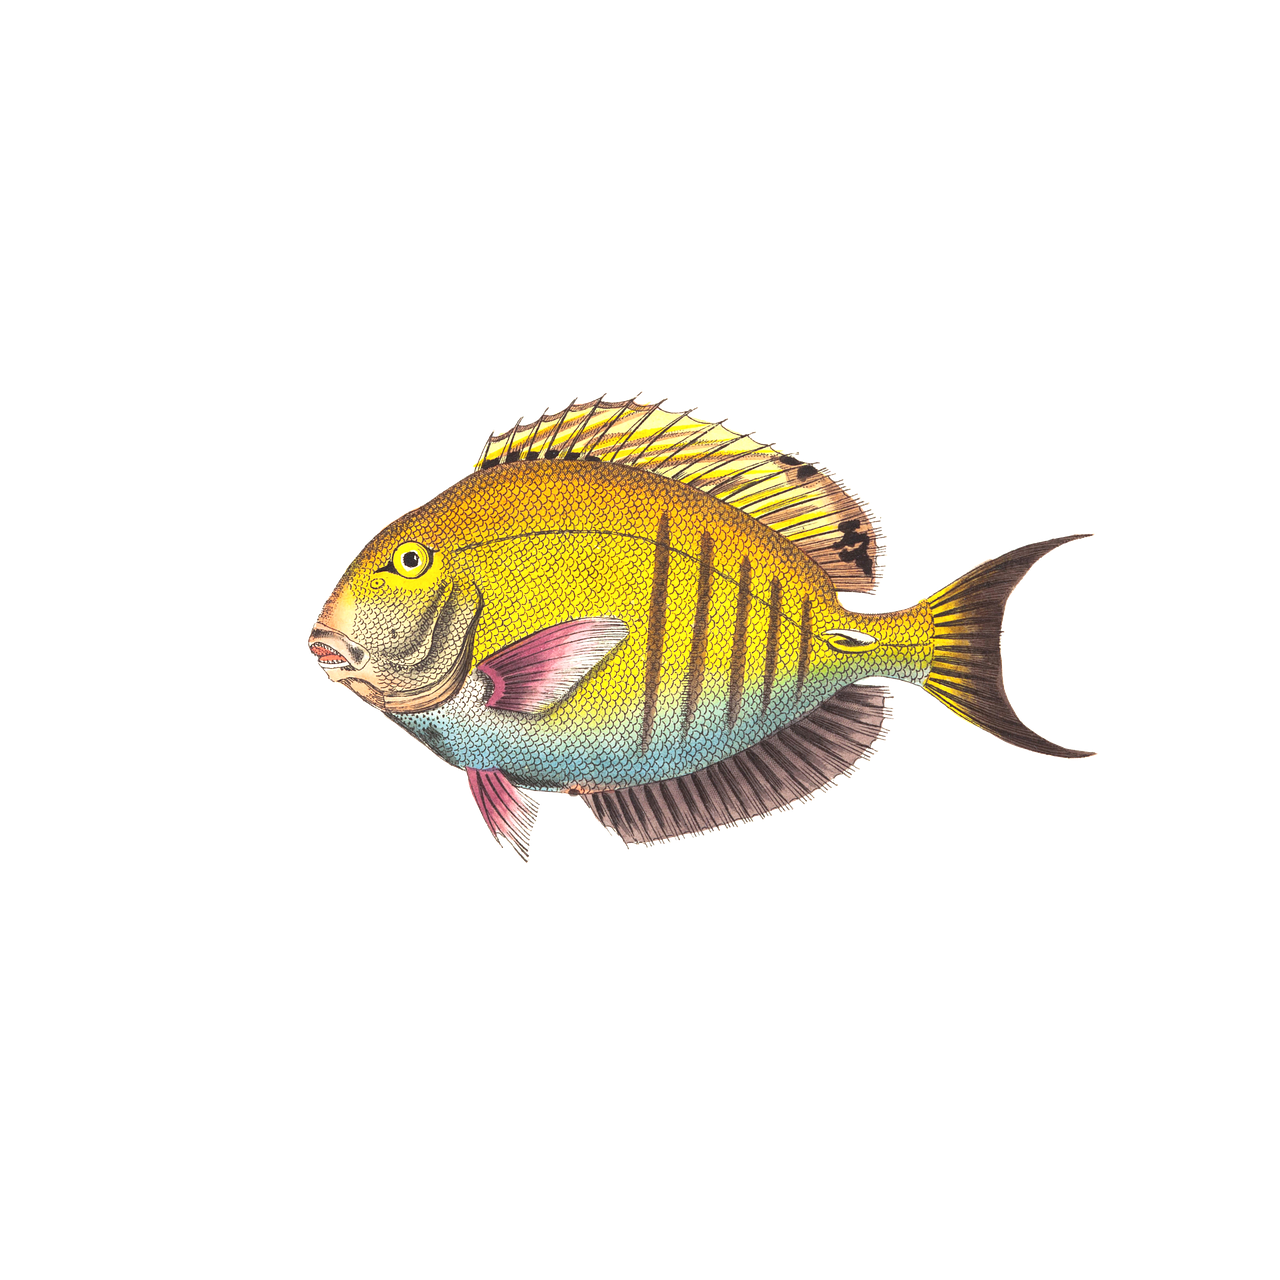 a close up of a fish on a black background, an illustration of, by Robert Medley, shutterstock, full color illustration, high detail illustration, vignette illustration, butterflyfish